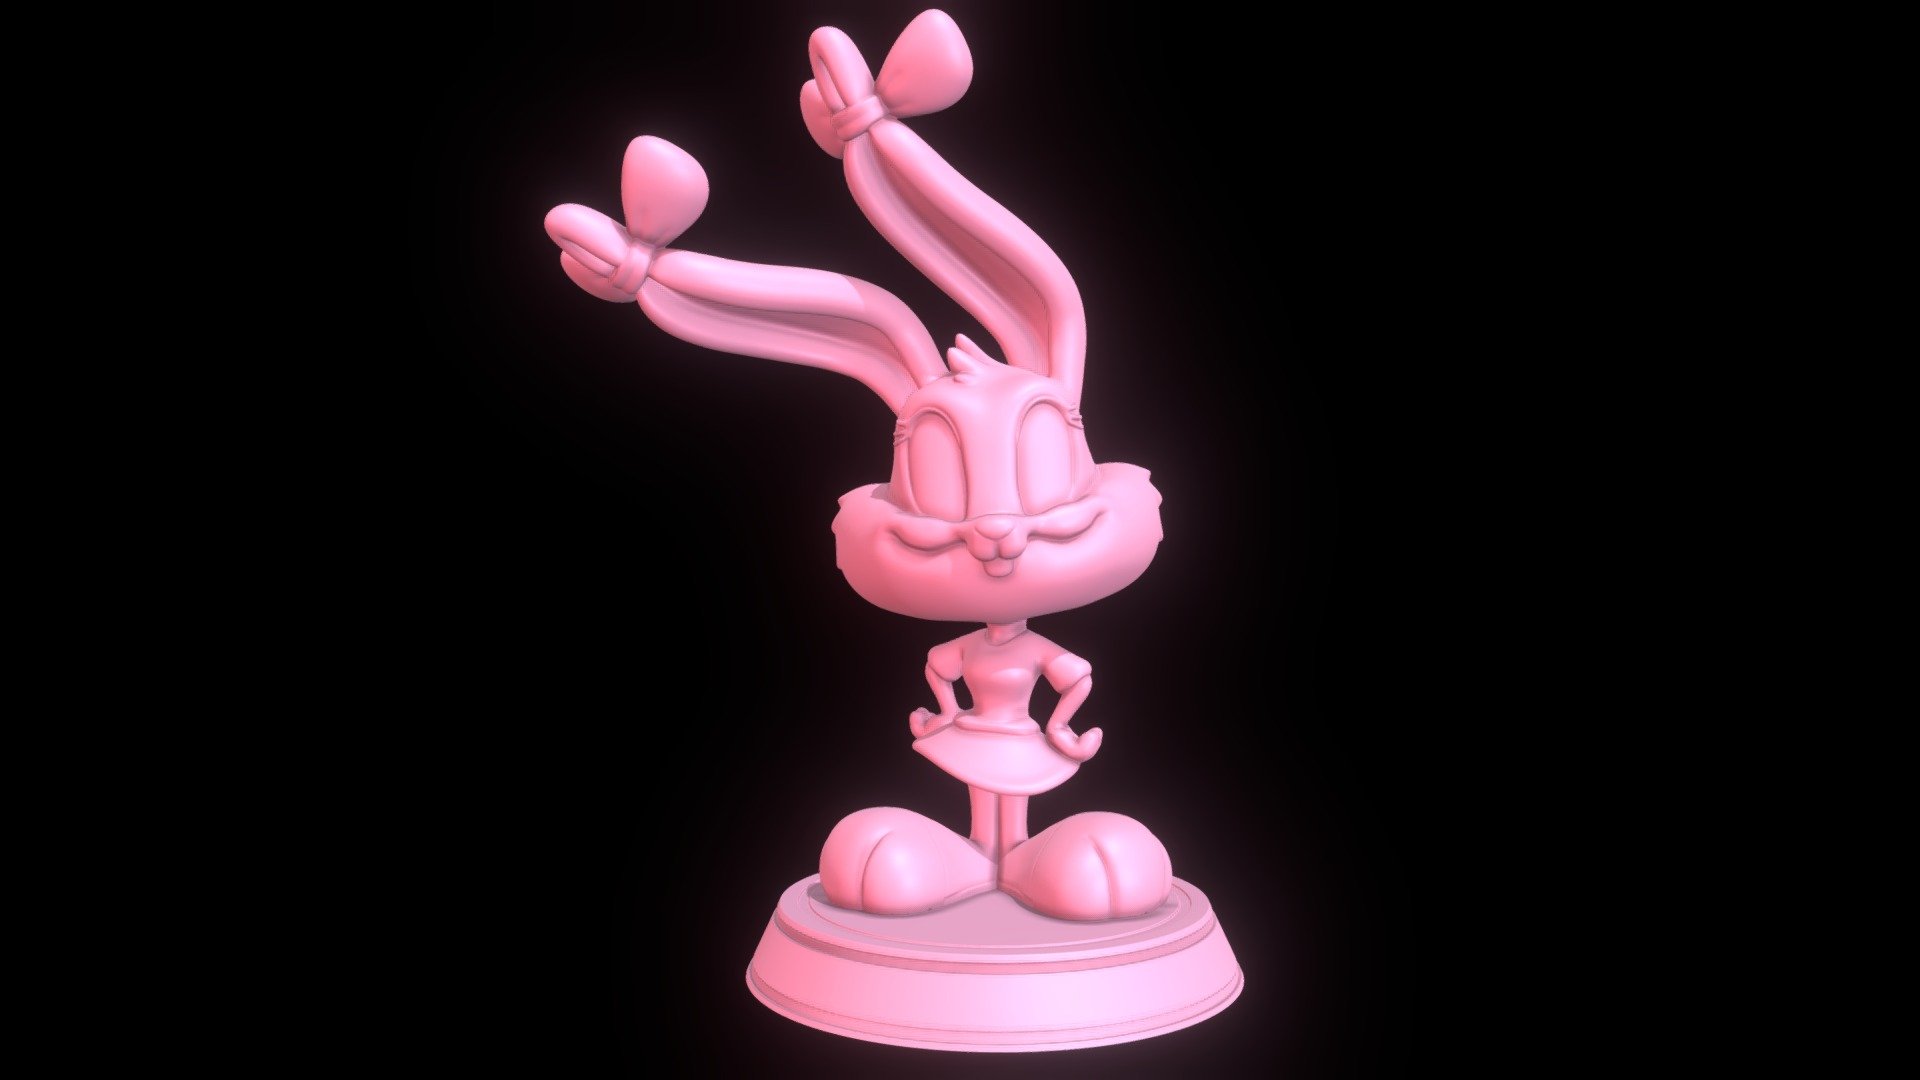 Character from Tiny Toon Adventures. See the model colored here https://www.deviantart.com/sillytoys/art/Babs-Bunny-Tiny-Toon-Adventures-3D-print-model-917316900 - Babs Bunny - Tiny Toon Adventures 3D print - Buy Royalty Free 3D model by SillyToys 3d model